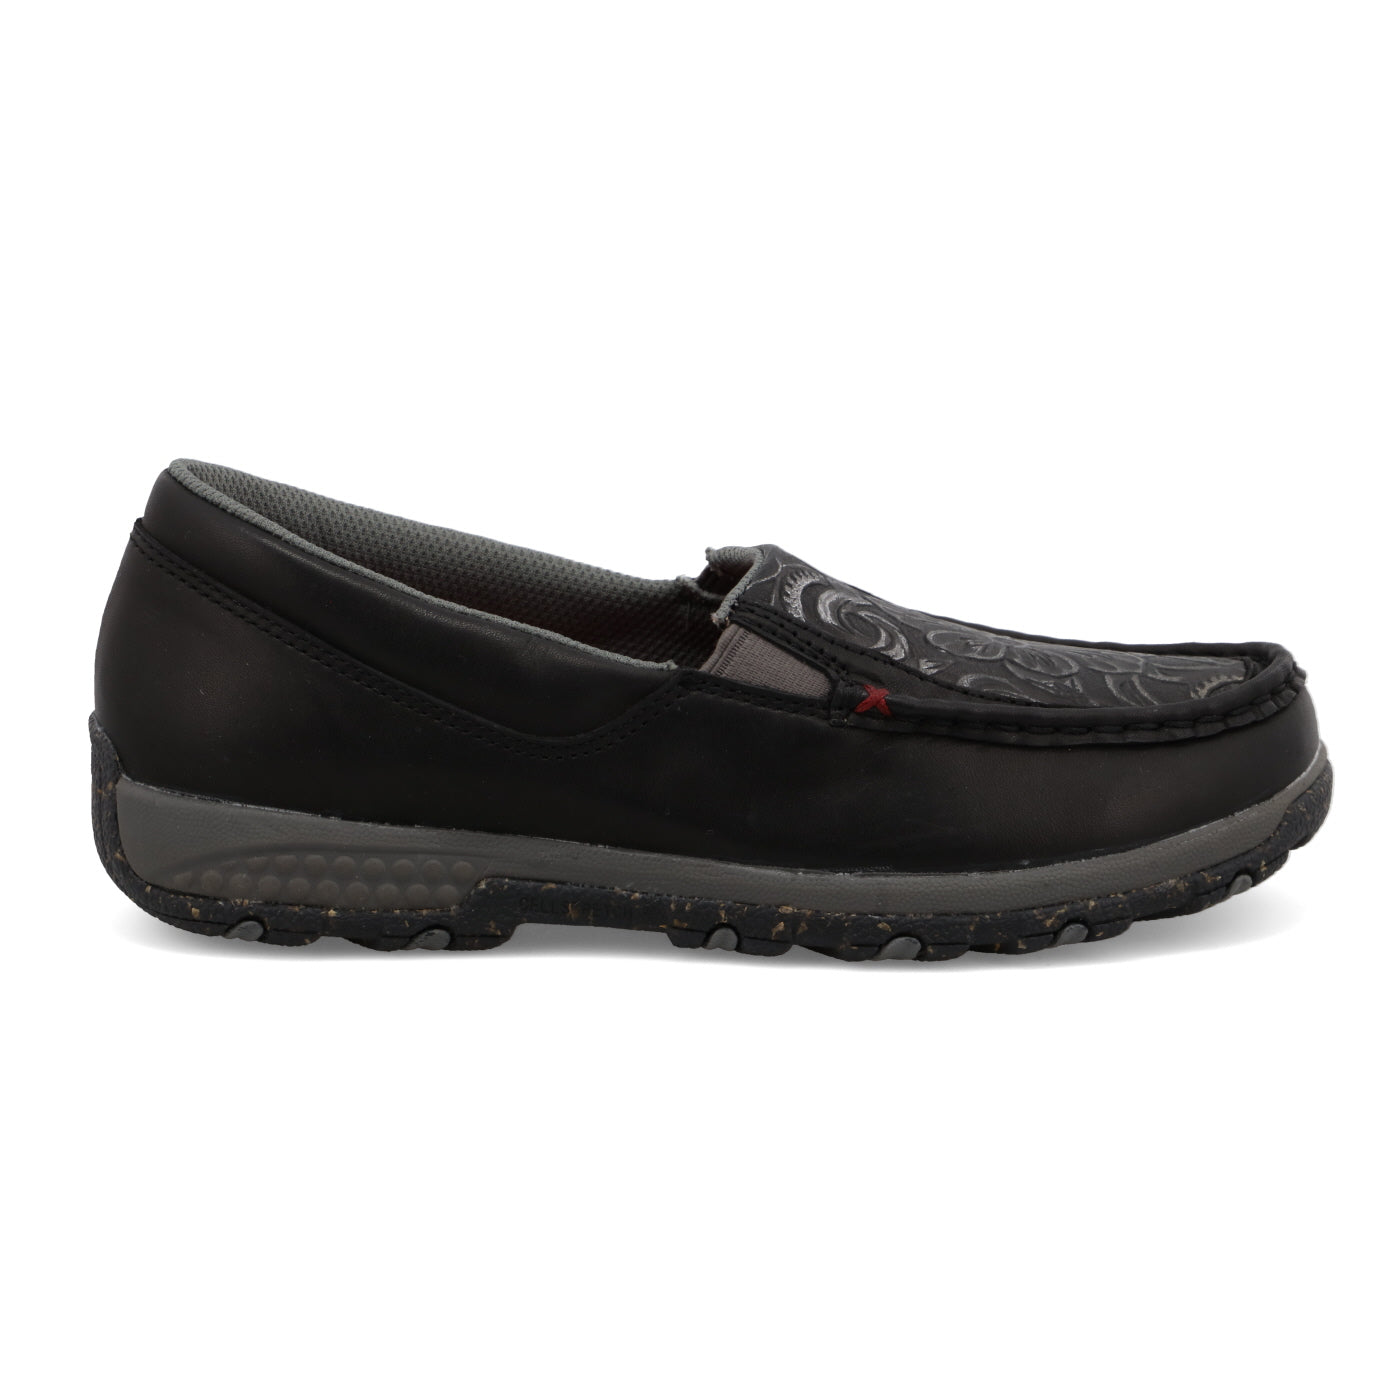 Twisted-X Slip-on Driving Moc